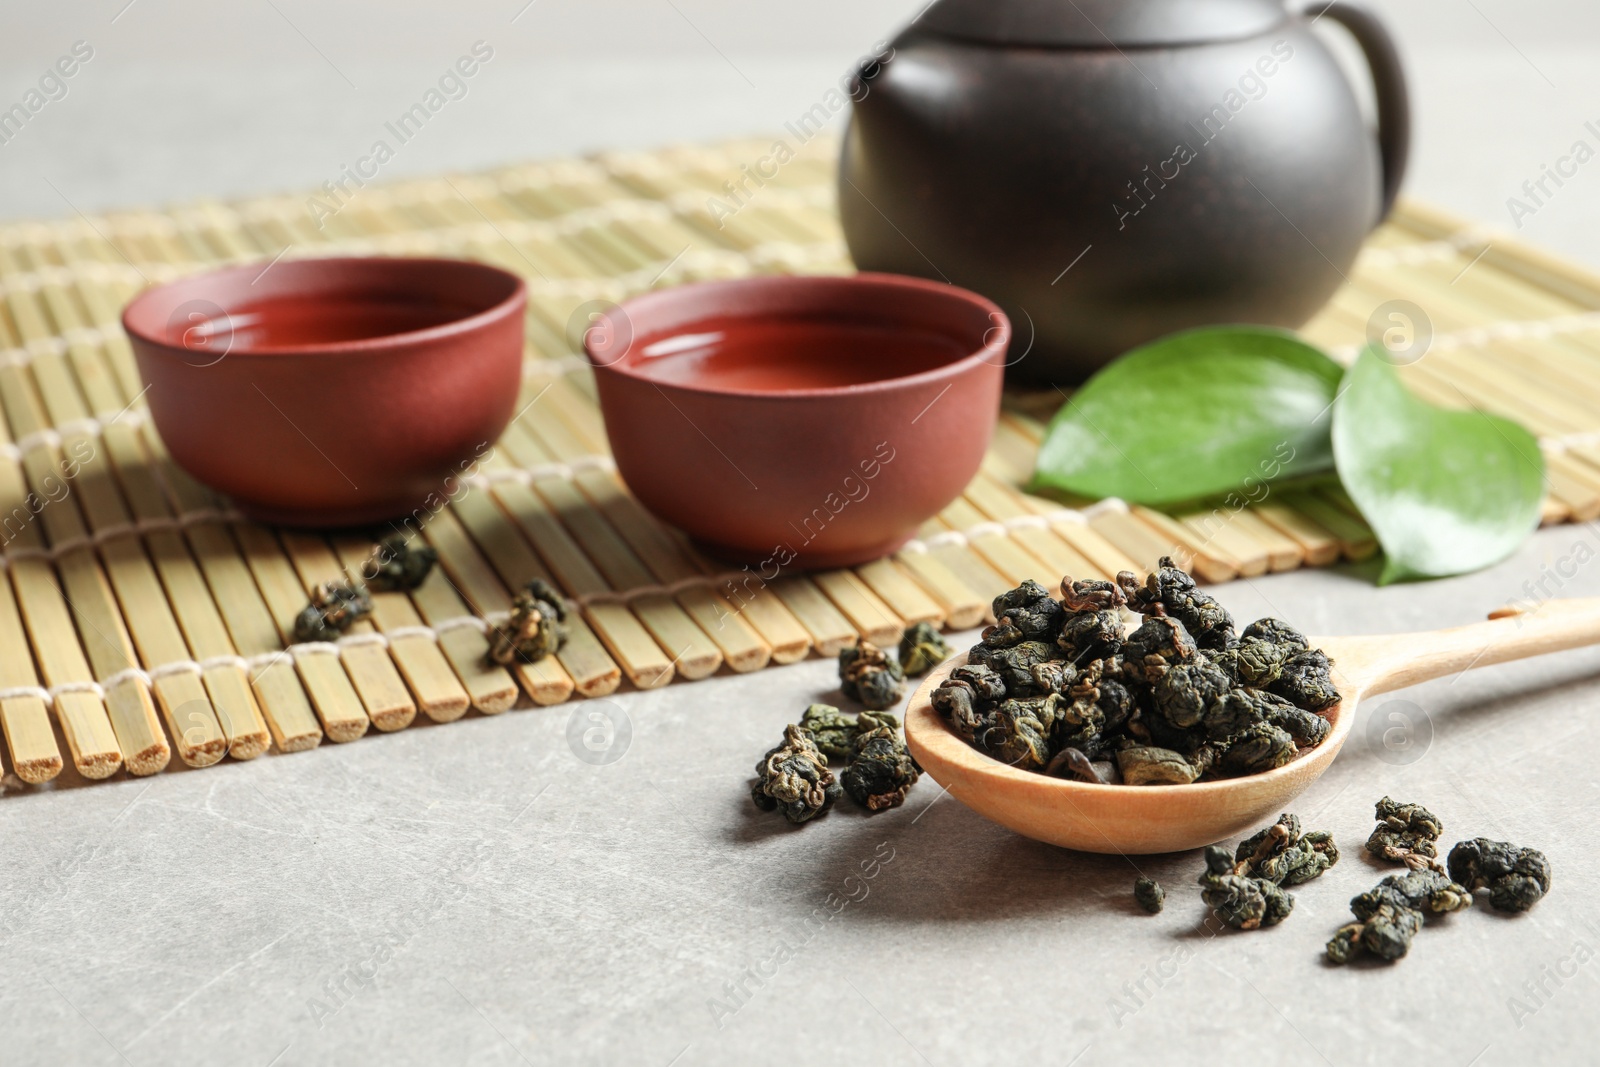 Photo of Composition with spoon of Tie Guan Yin Oolong tea and brewed beverage on grey table